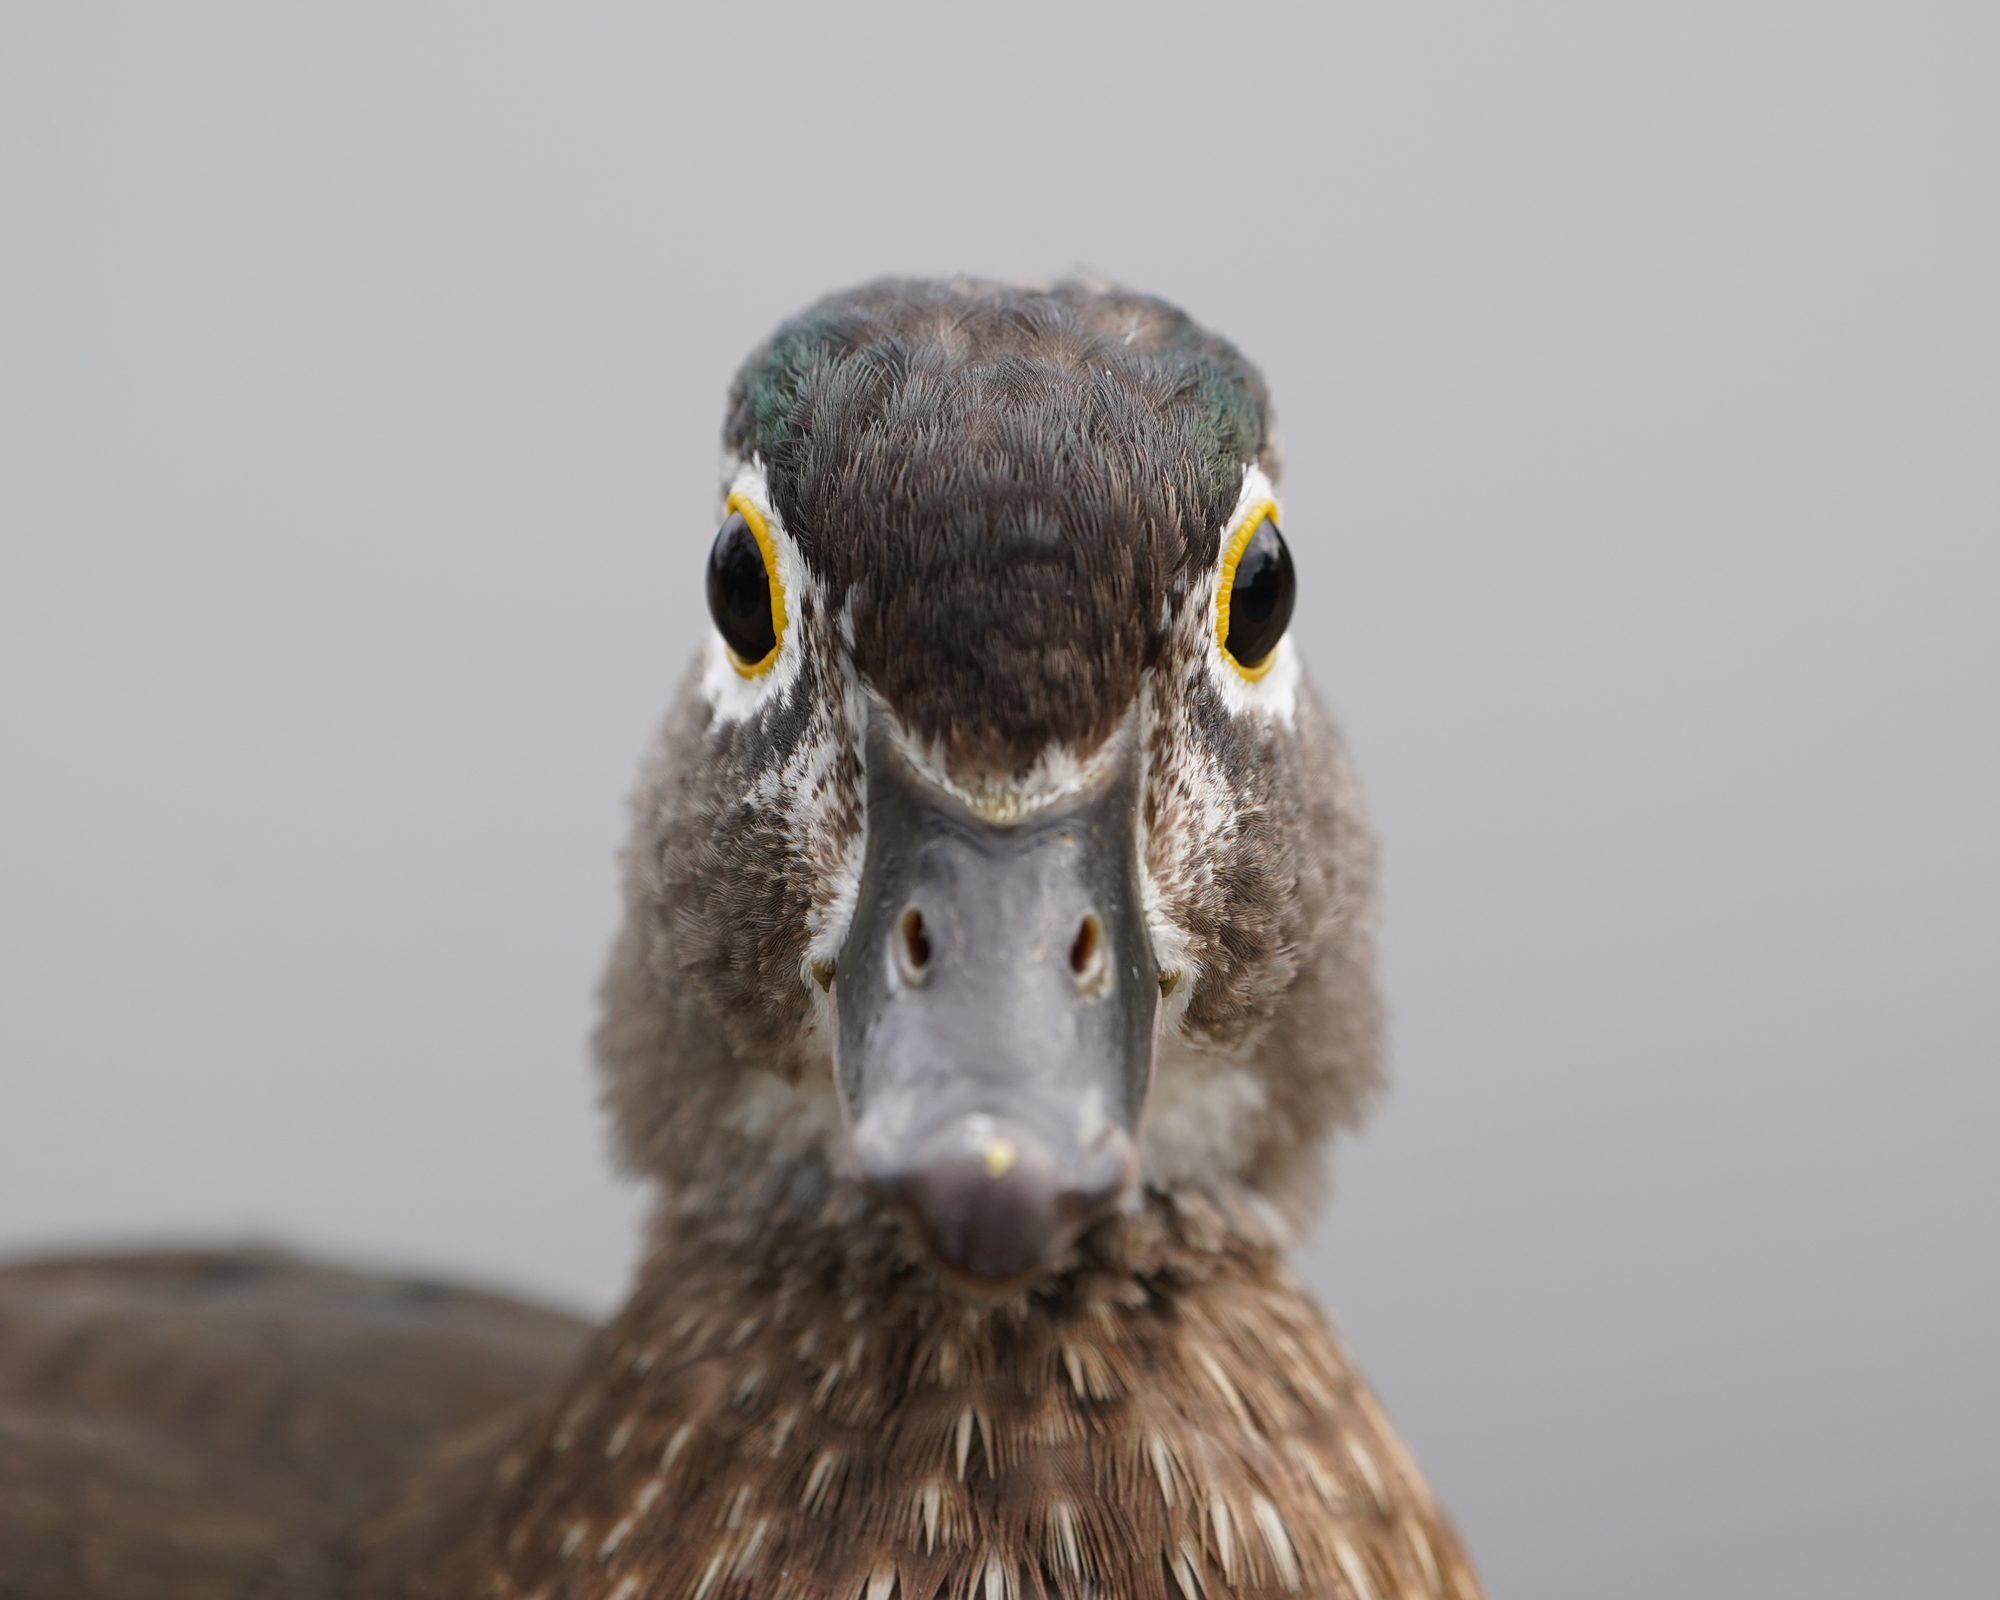 A female Wood Duck looking right at me with her deep dark eyes